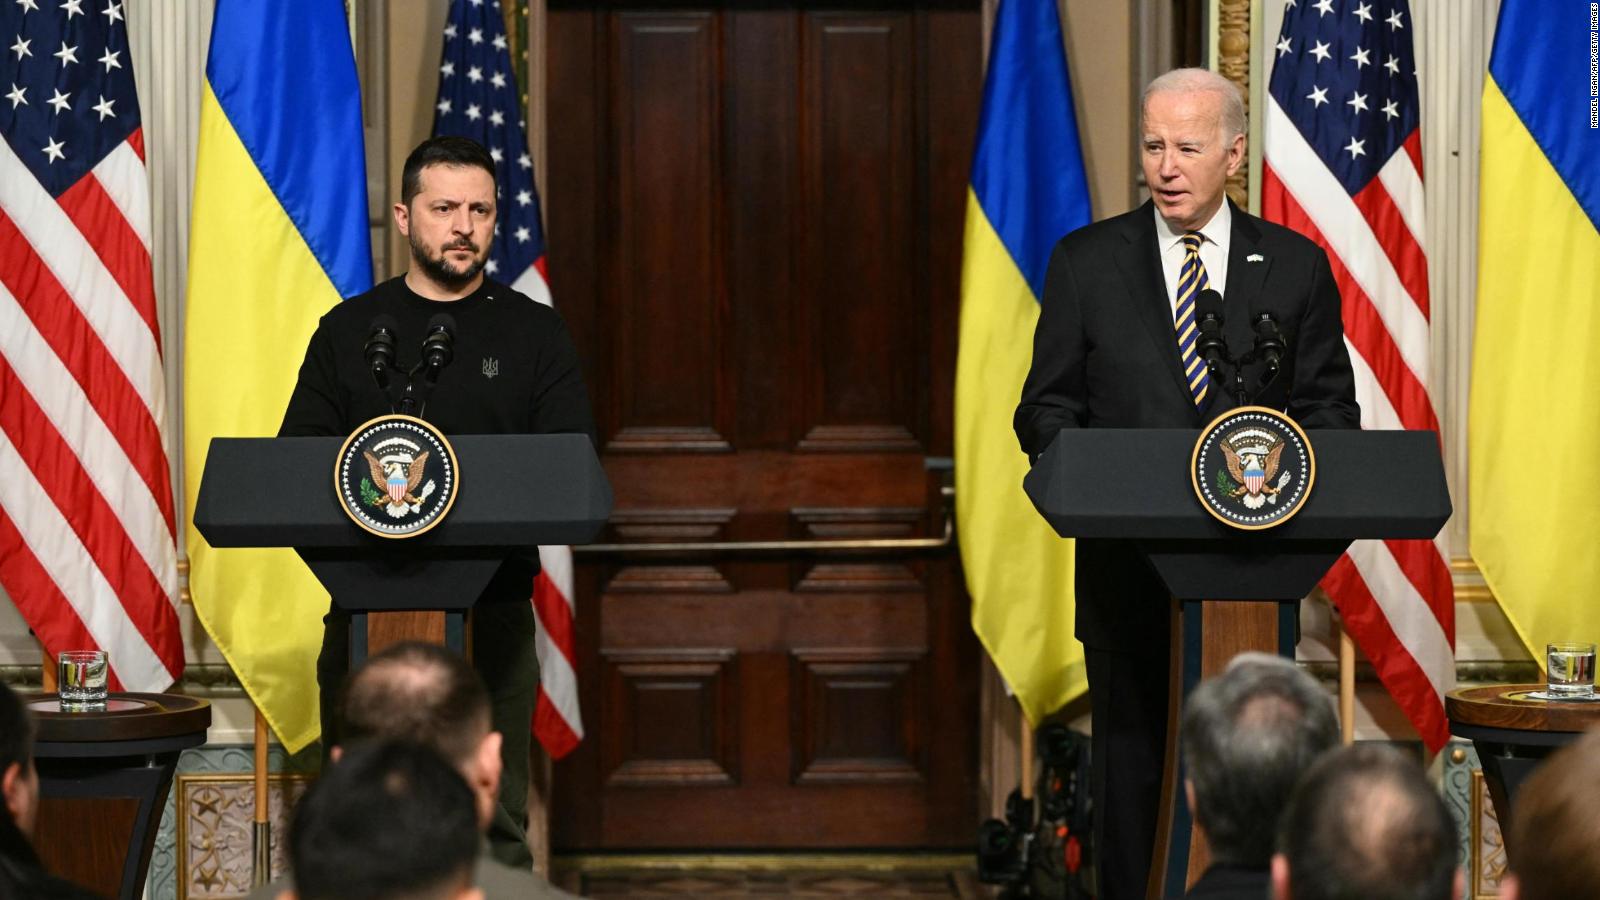 The US and its role in helping Ukraine against Russia